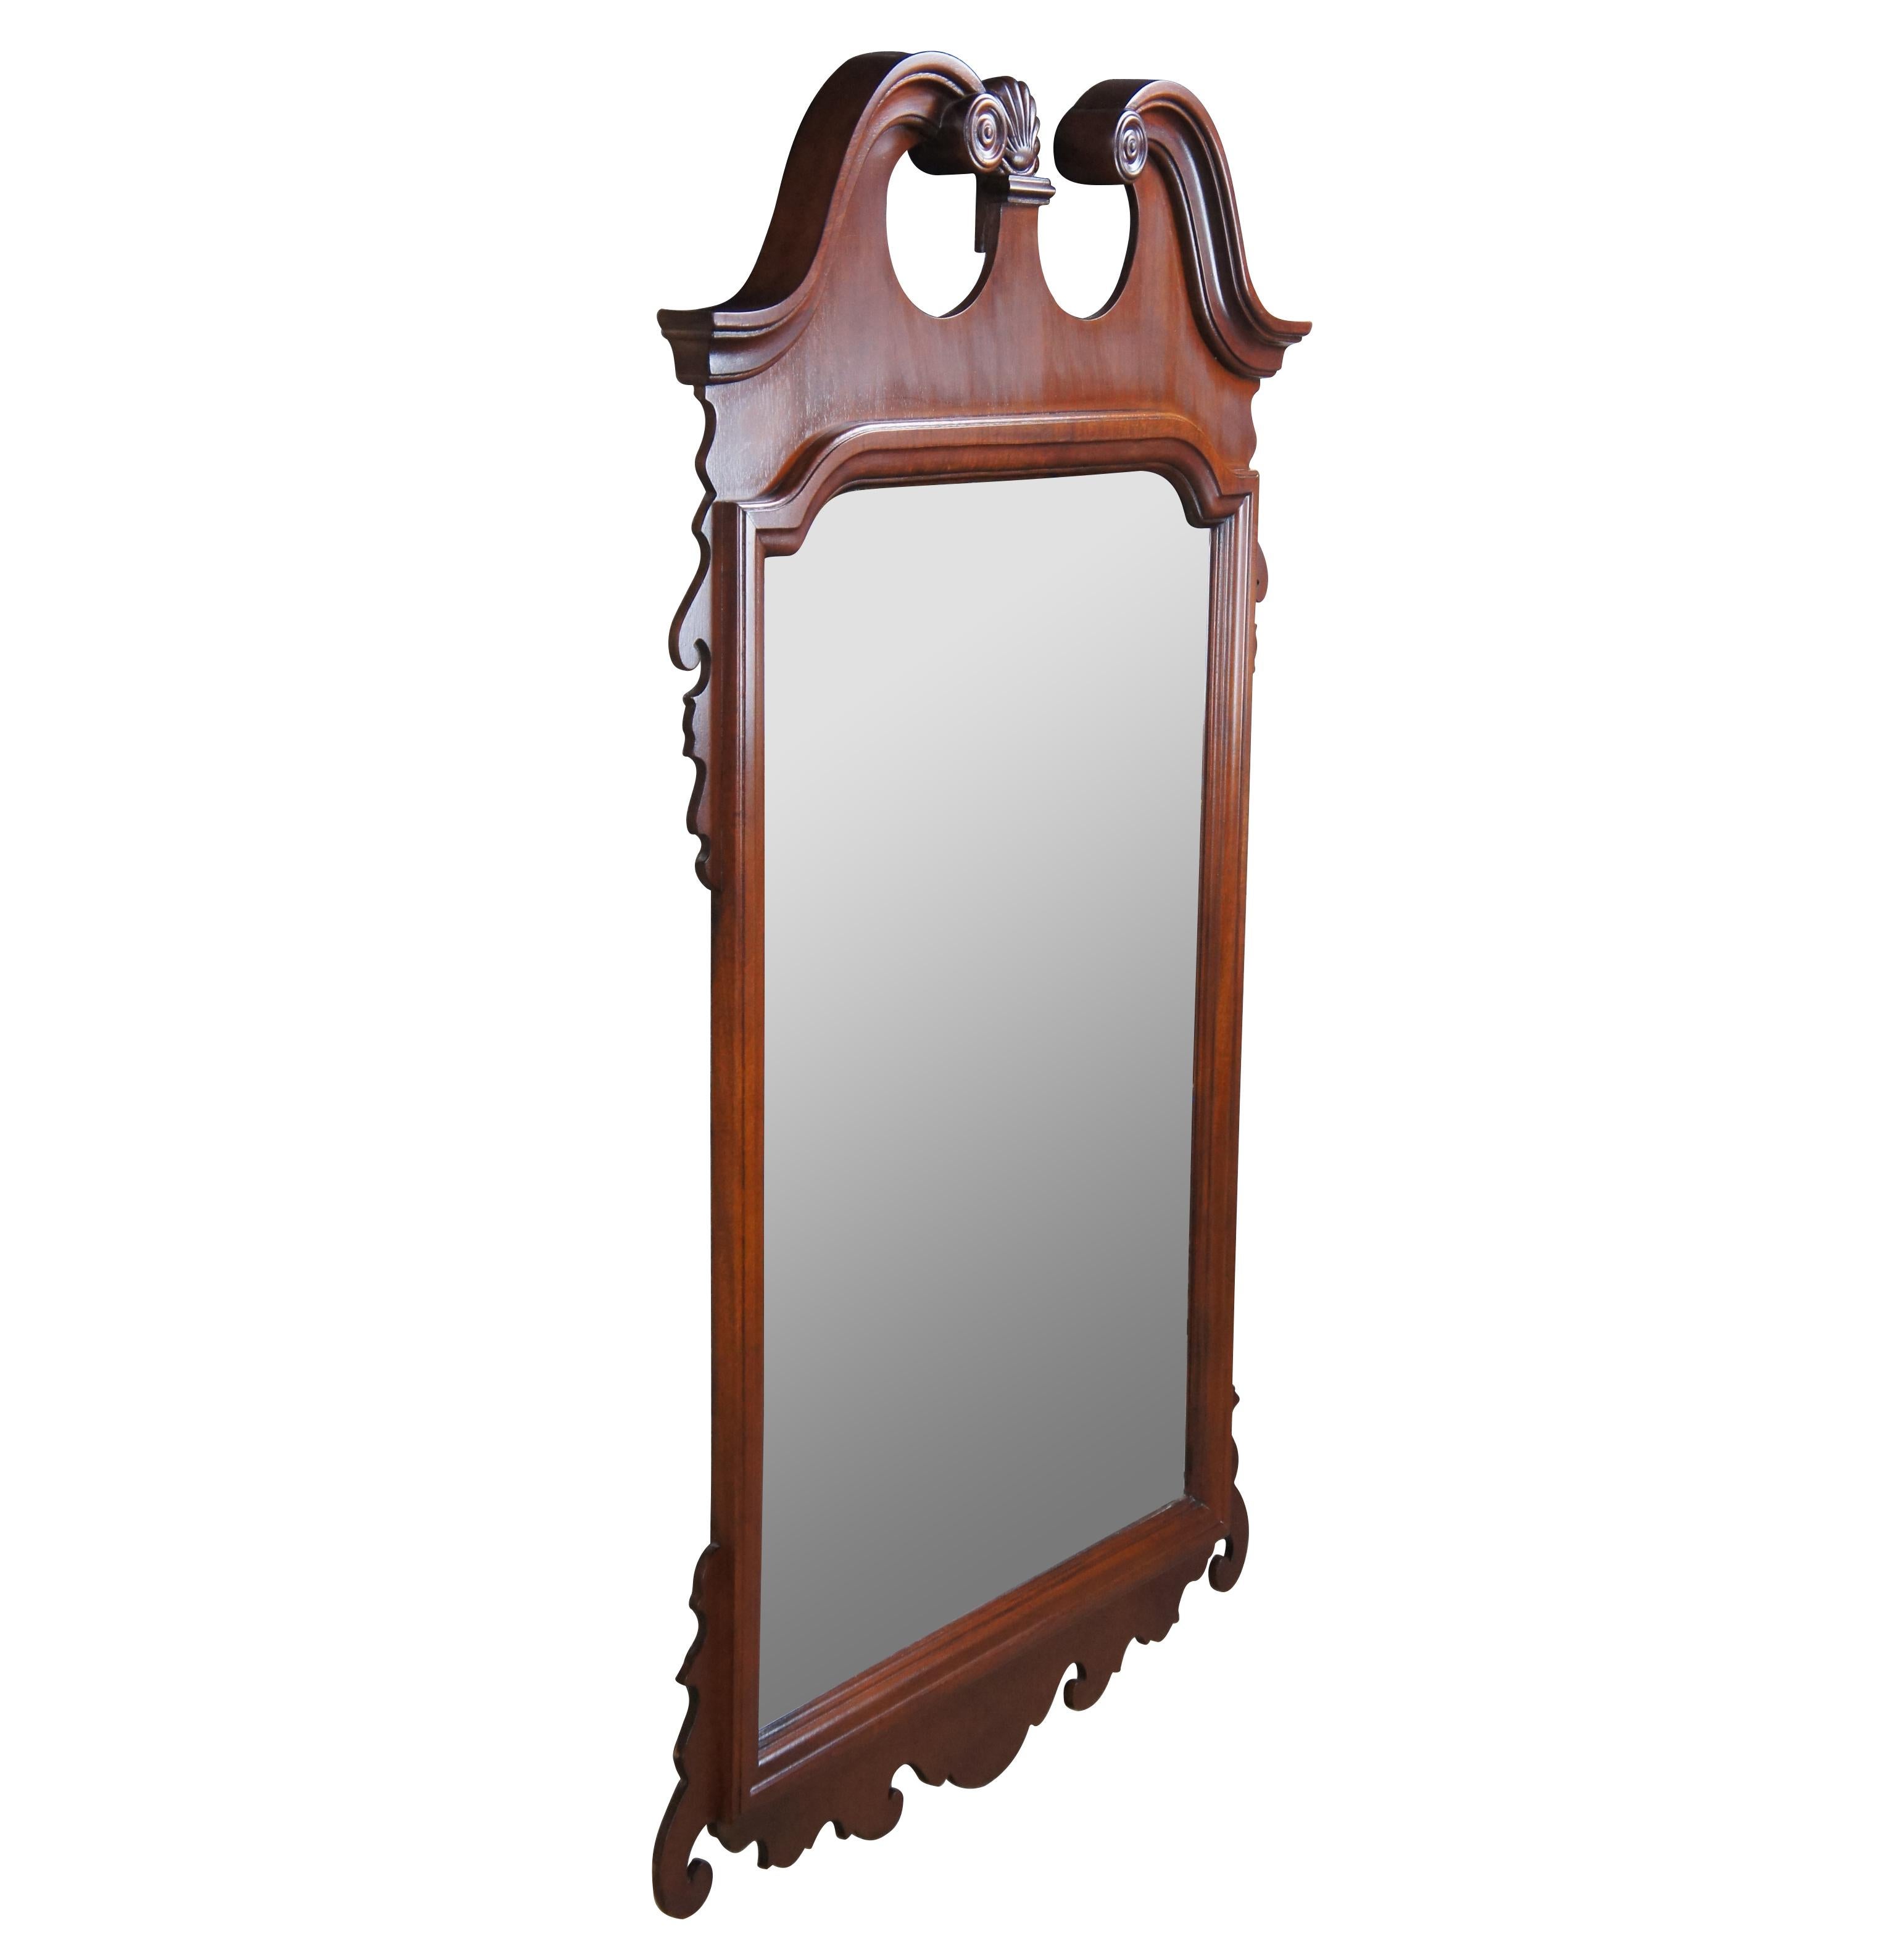 Vintage Chippendale style mahogany mirror. Beautifully designed with a scalloped finial between open pediment. The frame features elegant scrolling. The glass plate is beveled. Marked along the back made in USA. Measure: 50